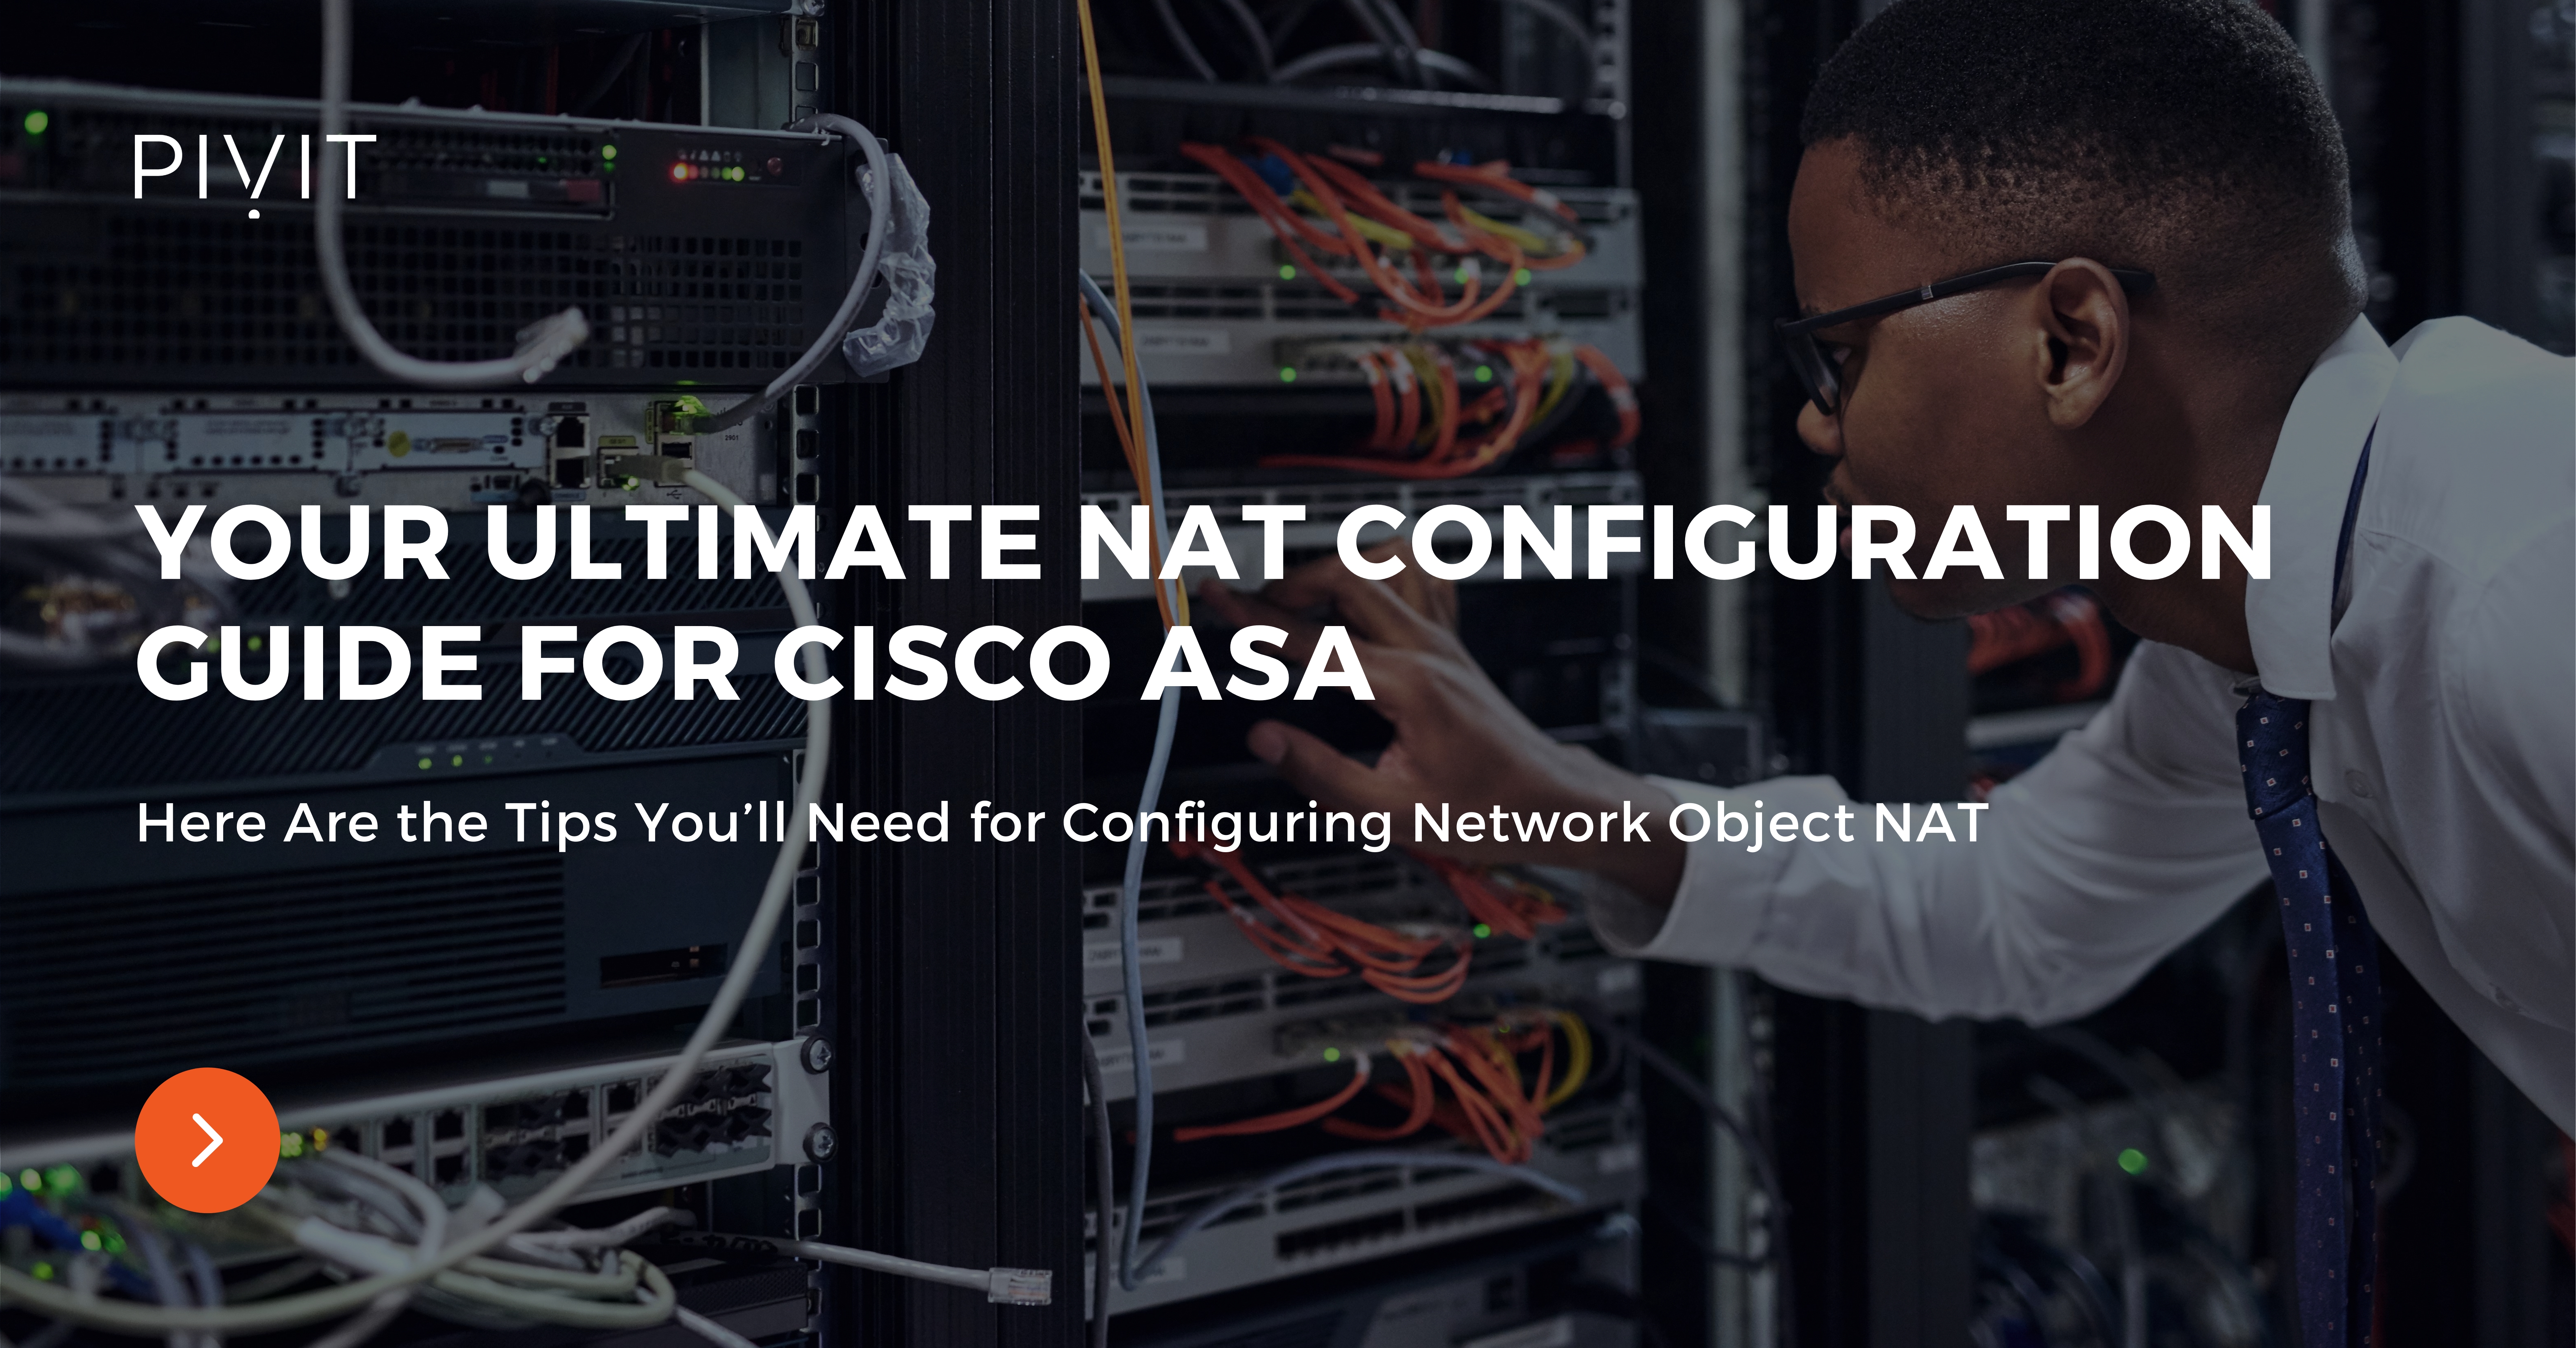 Your Ultimate NAT Configuration Guide for Cisco ASA